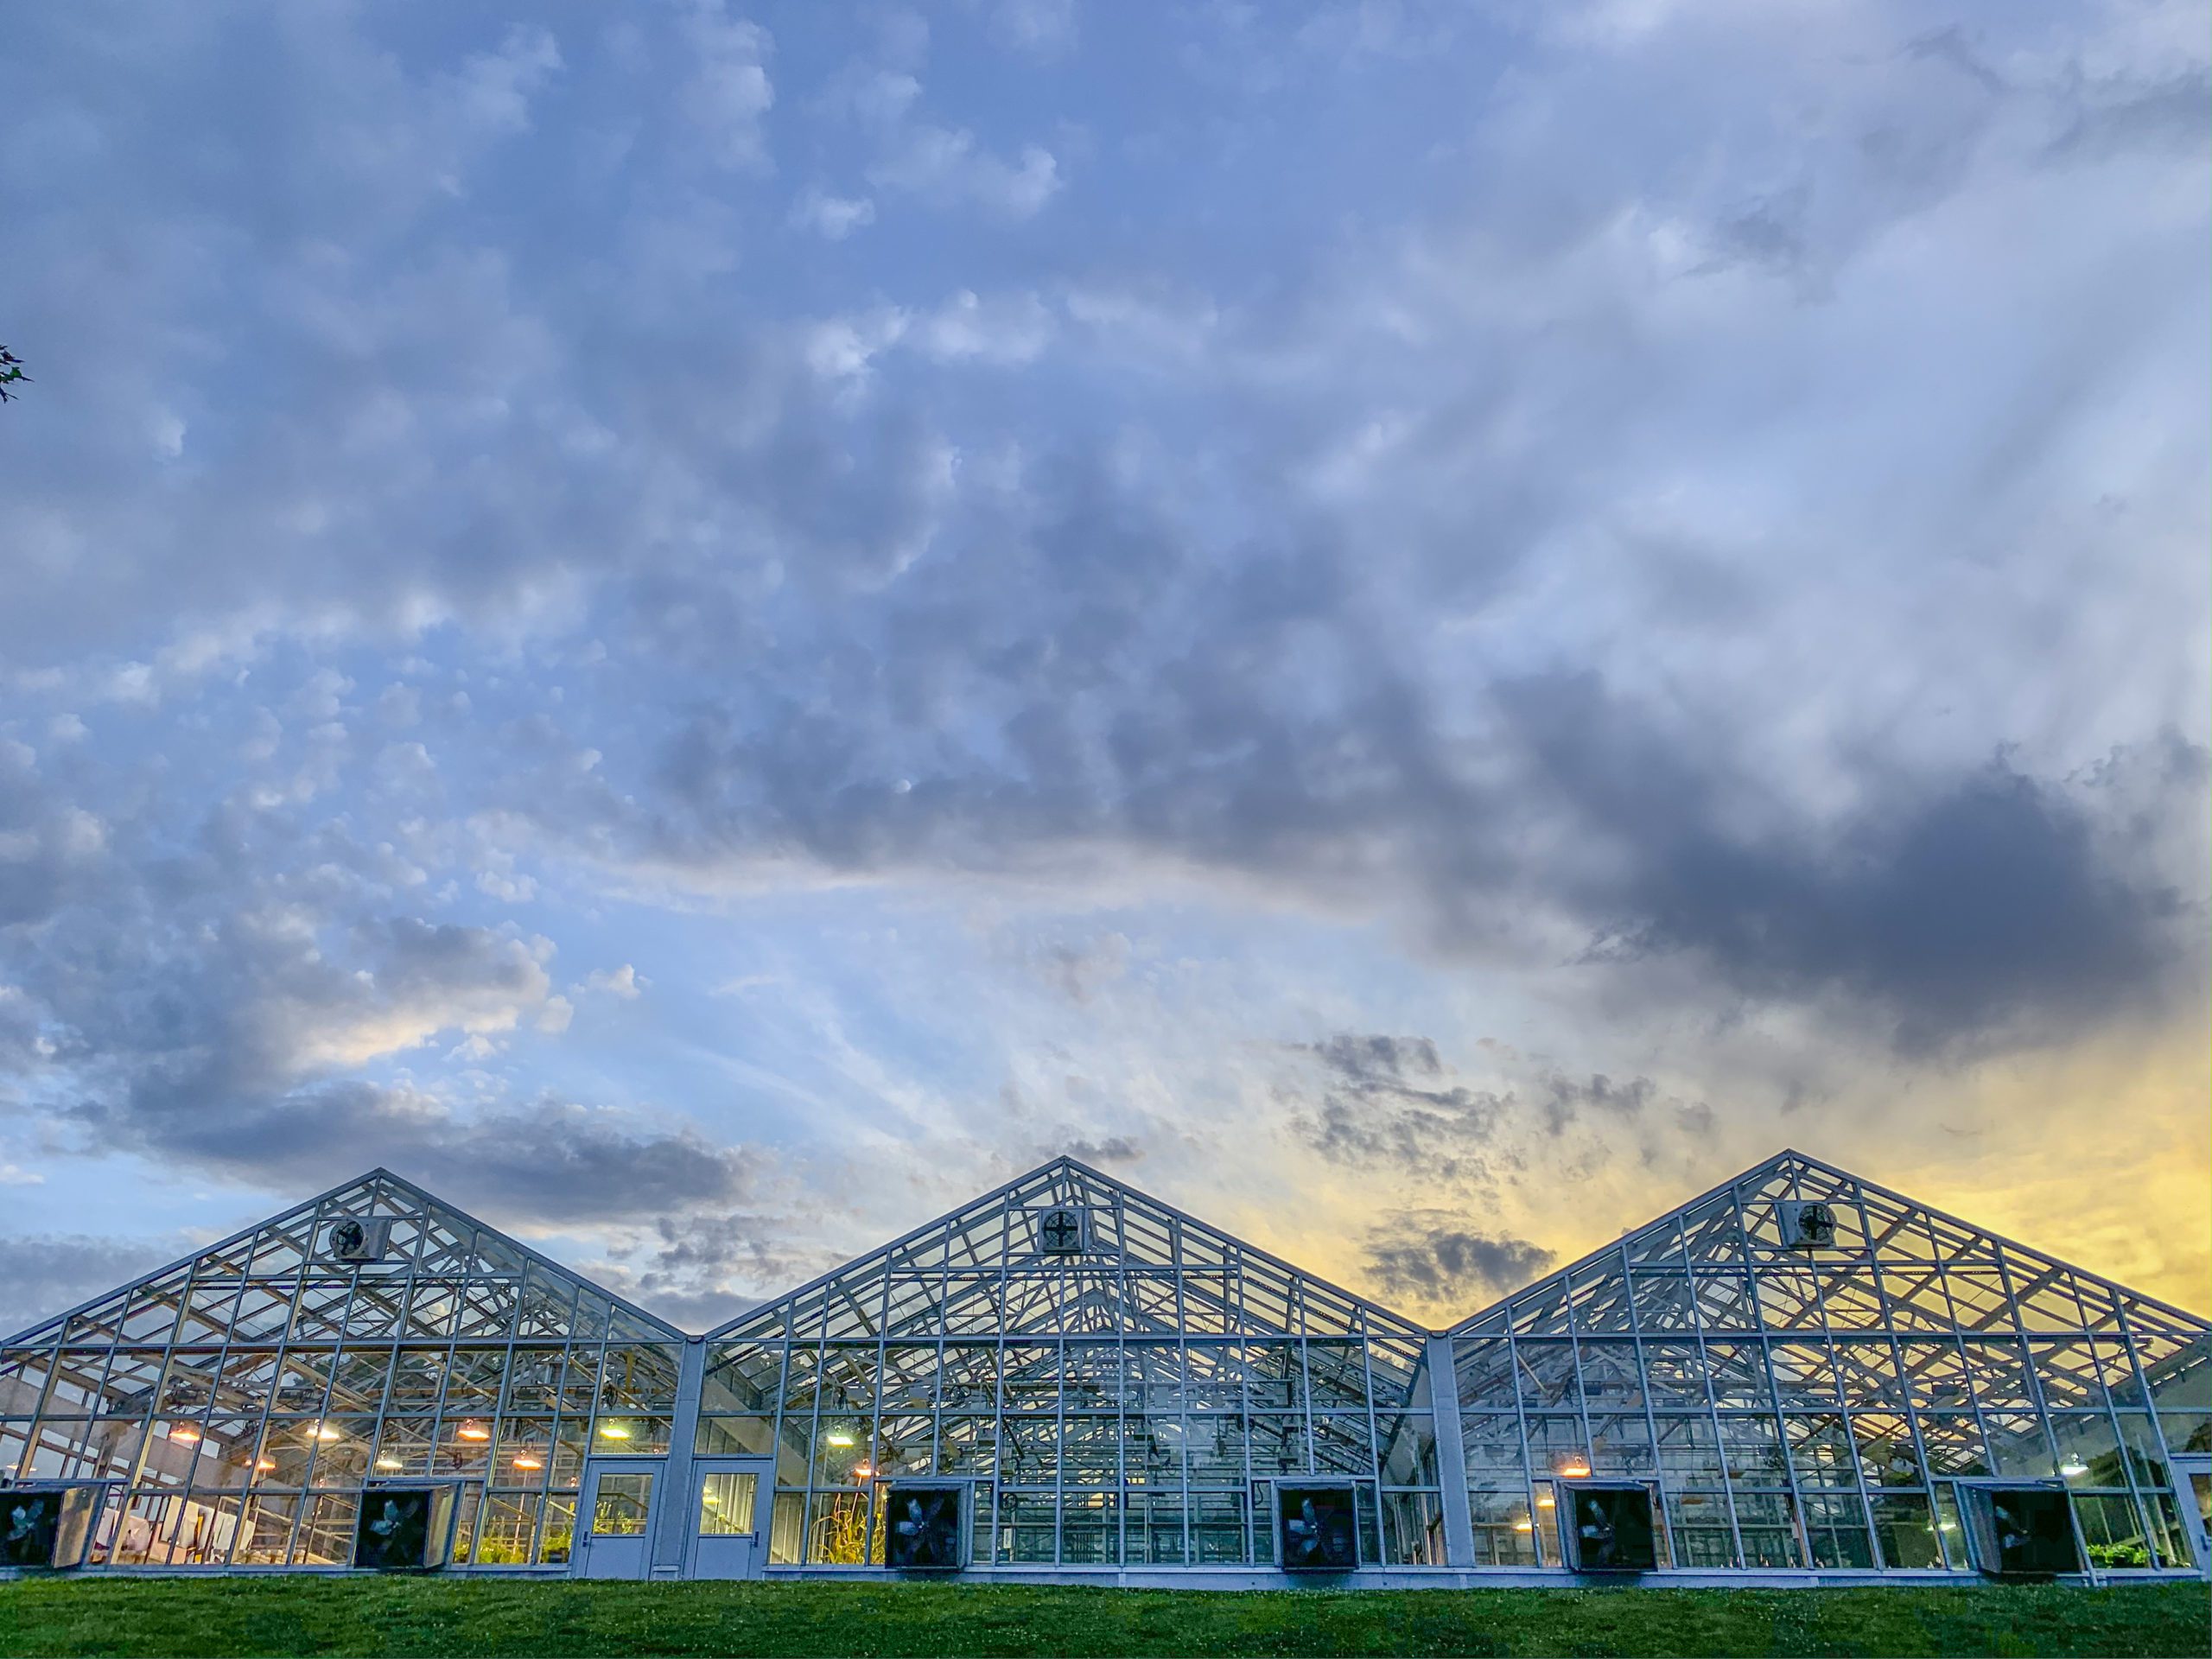 Three greenhouses with sunsetting in background.